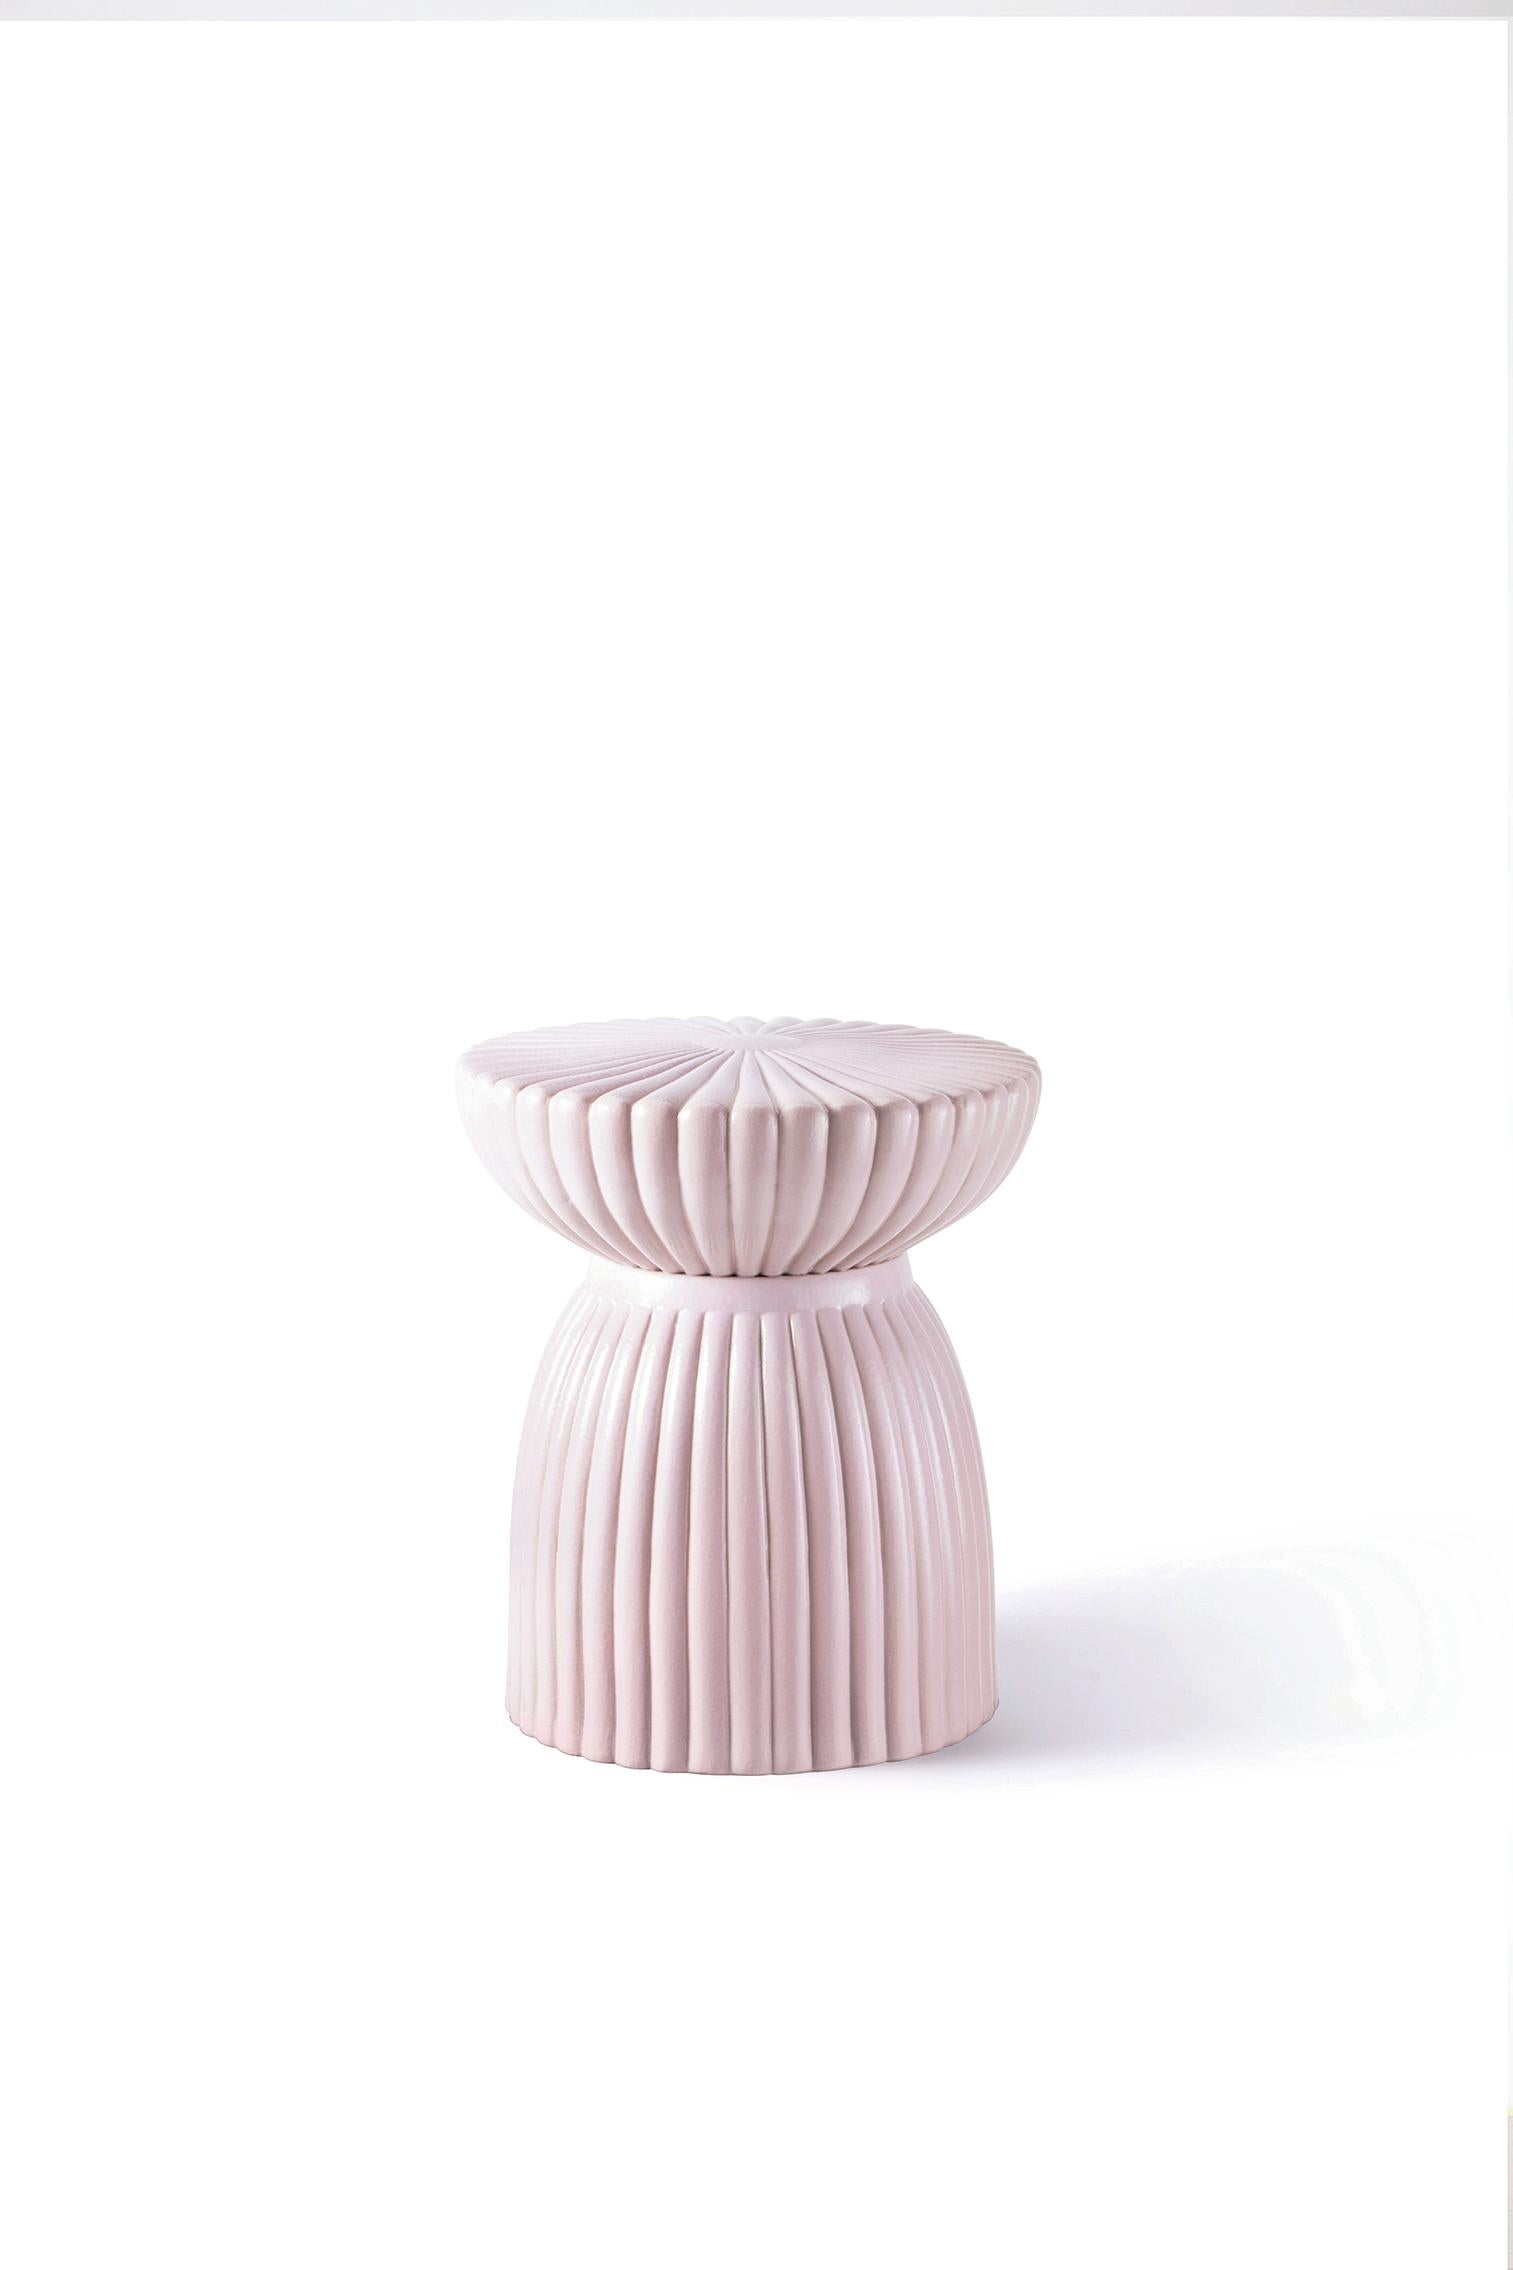 Glossy ceramic stool/guéridon designed by Thomas Dariel, Maison Dada
Measures: diameter 41.2 * height 45 cm
Ceramic in glossy black, blue or pink glaze finish
The name of this piece has been chosen as a nod to Guy de Maupassant’s famous character